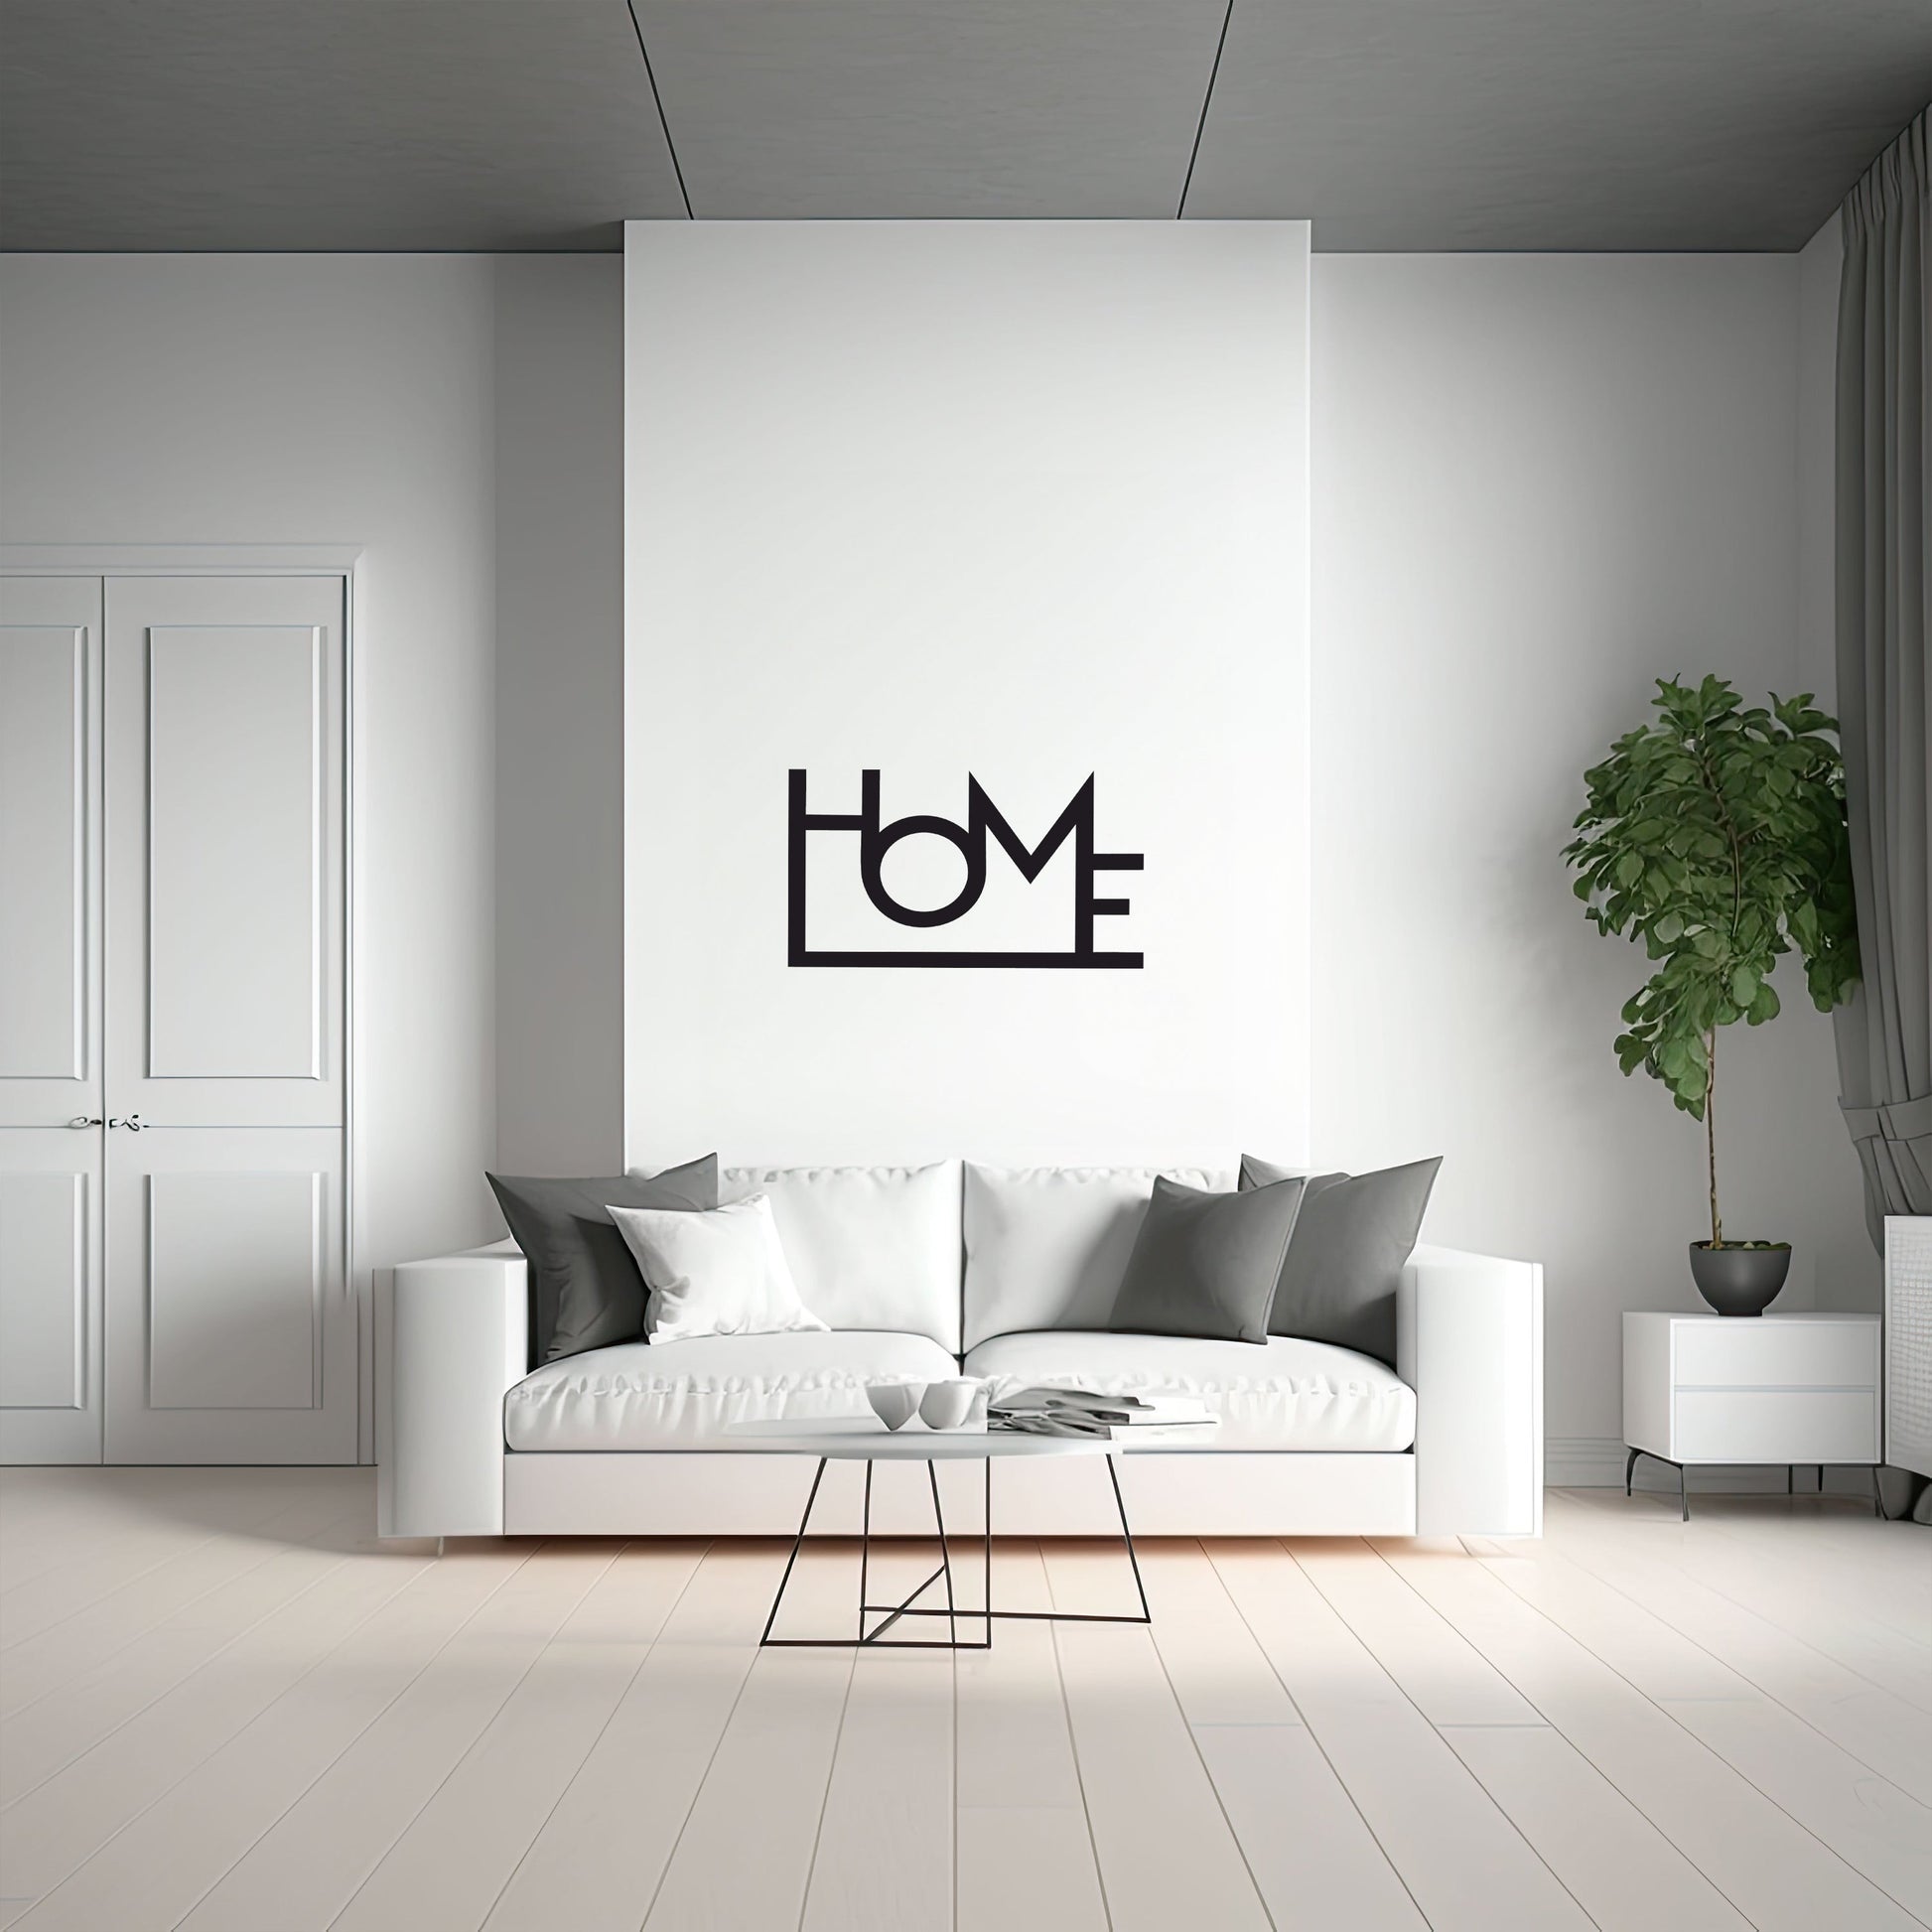 Wooden wall decoration home sign in living room